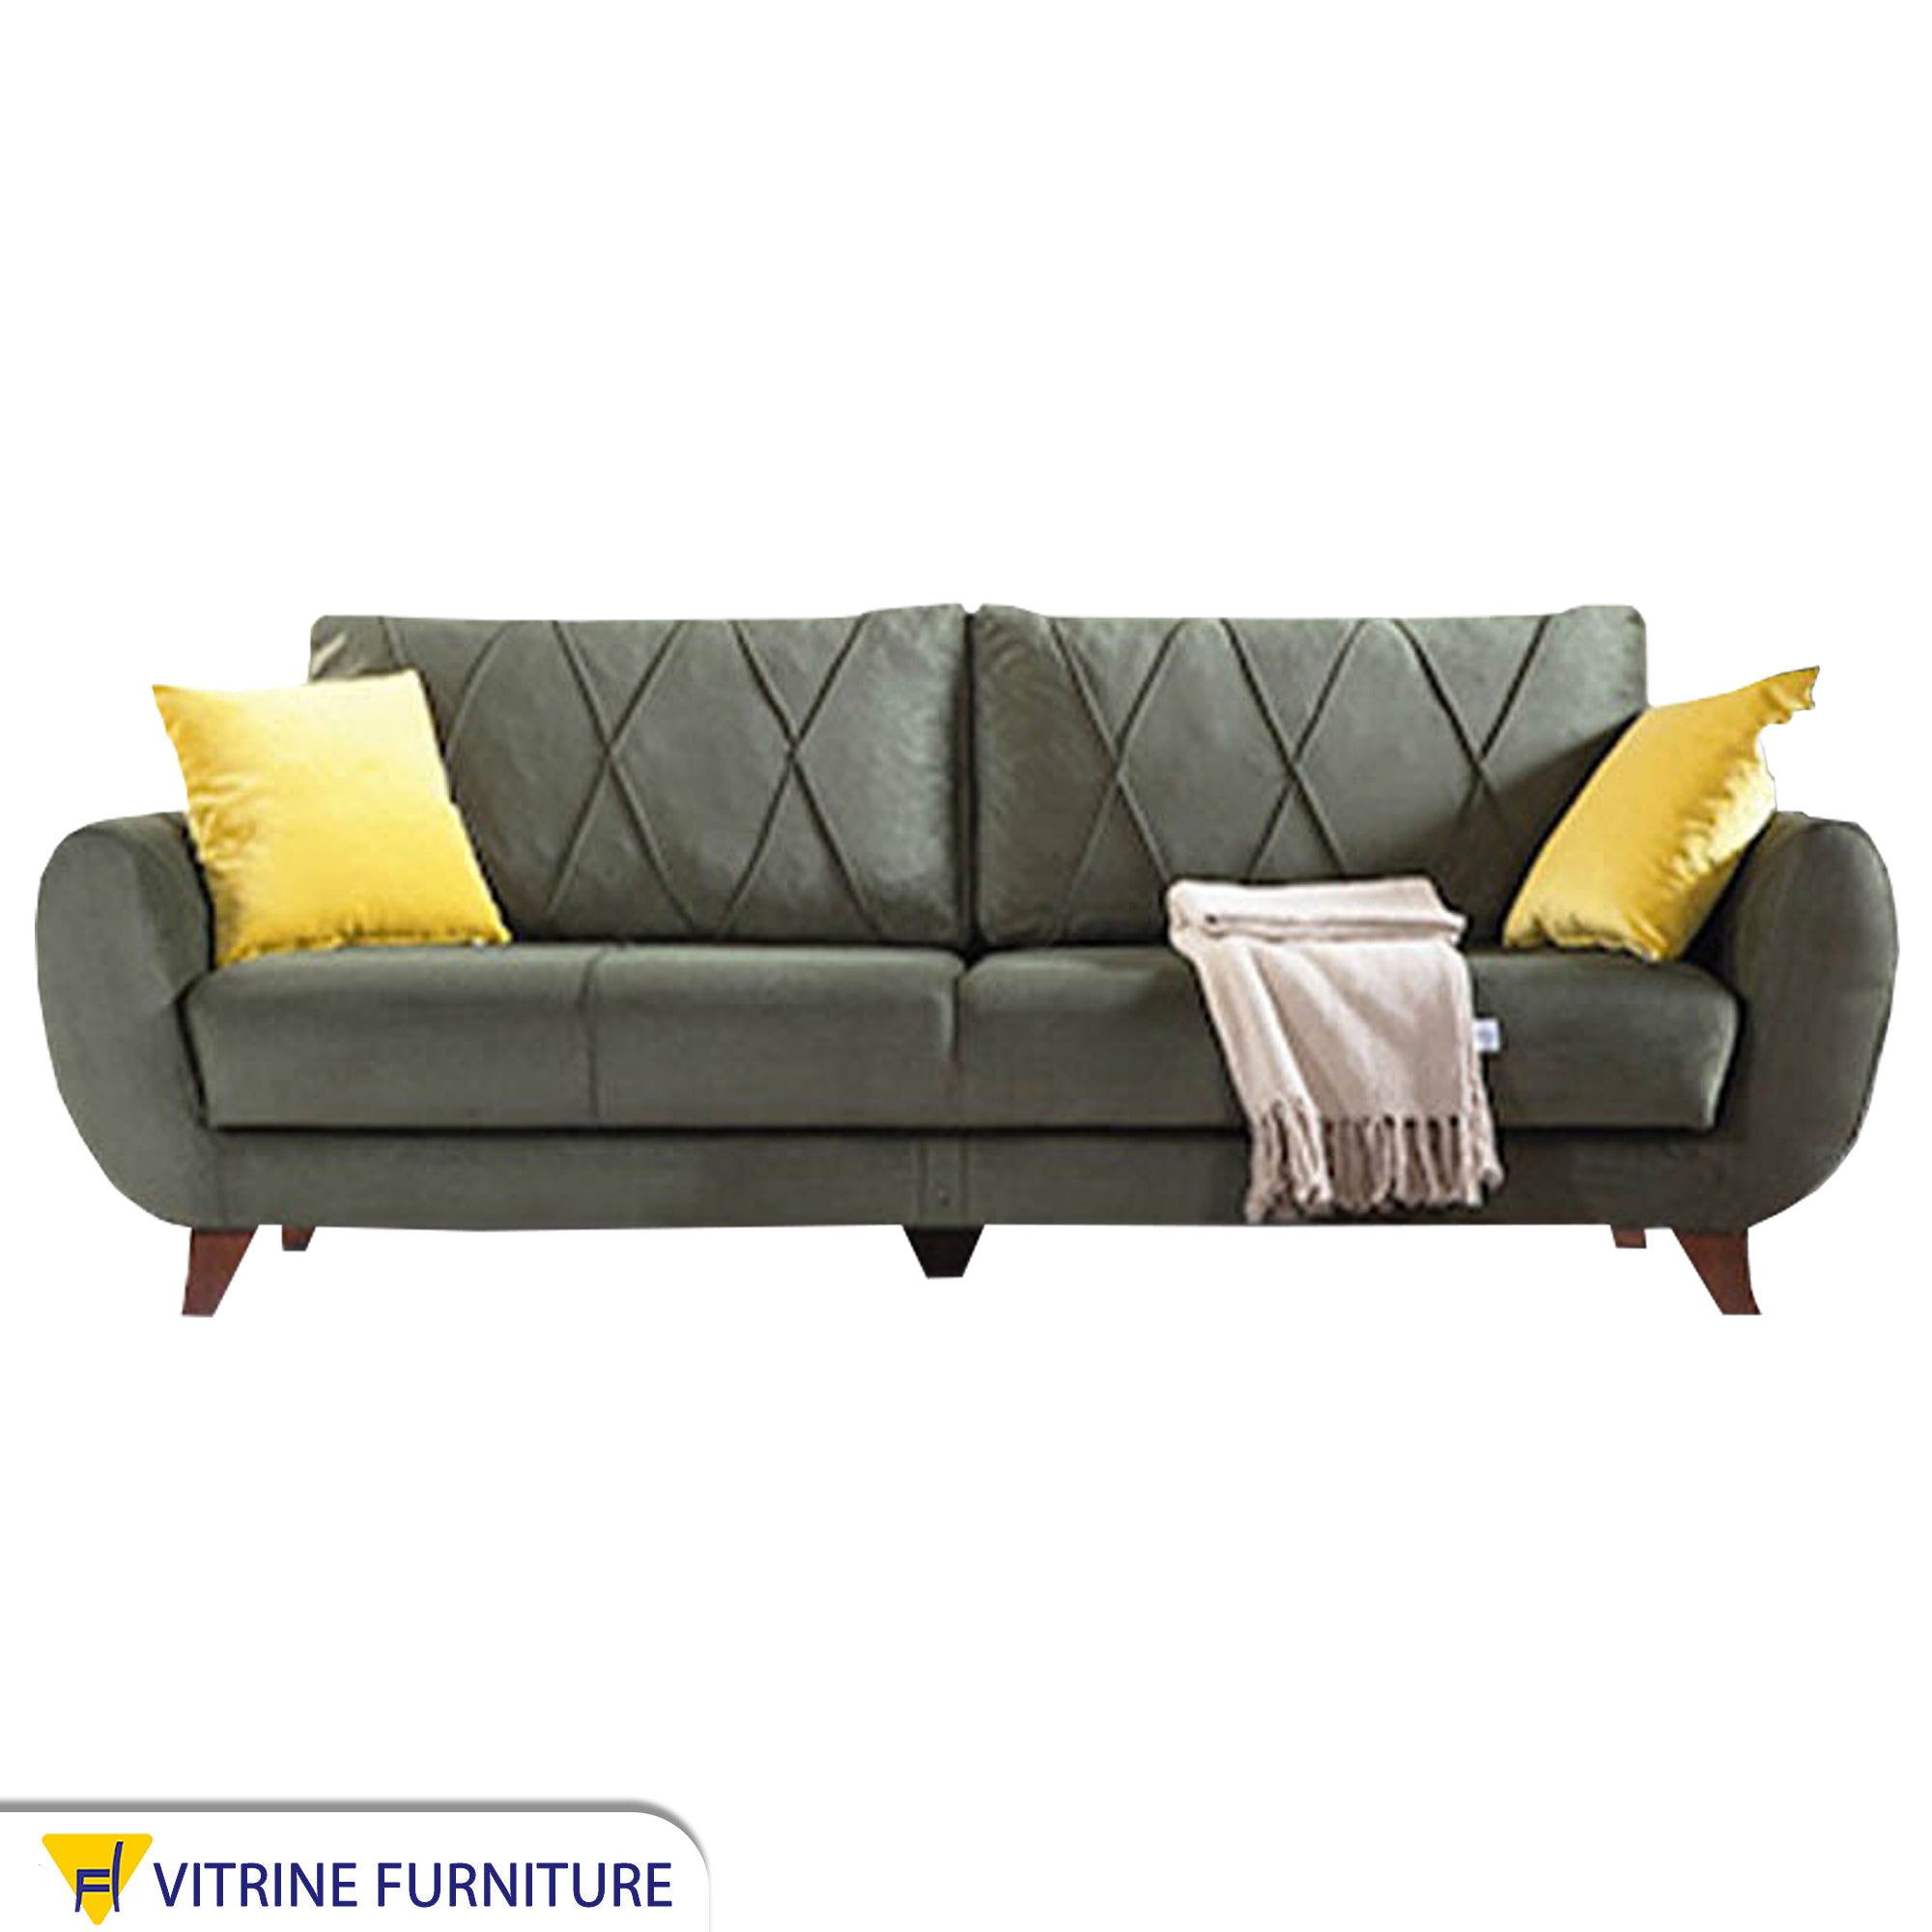 Sofa bed in Grey color and yellow cushions